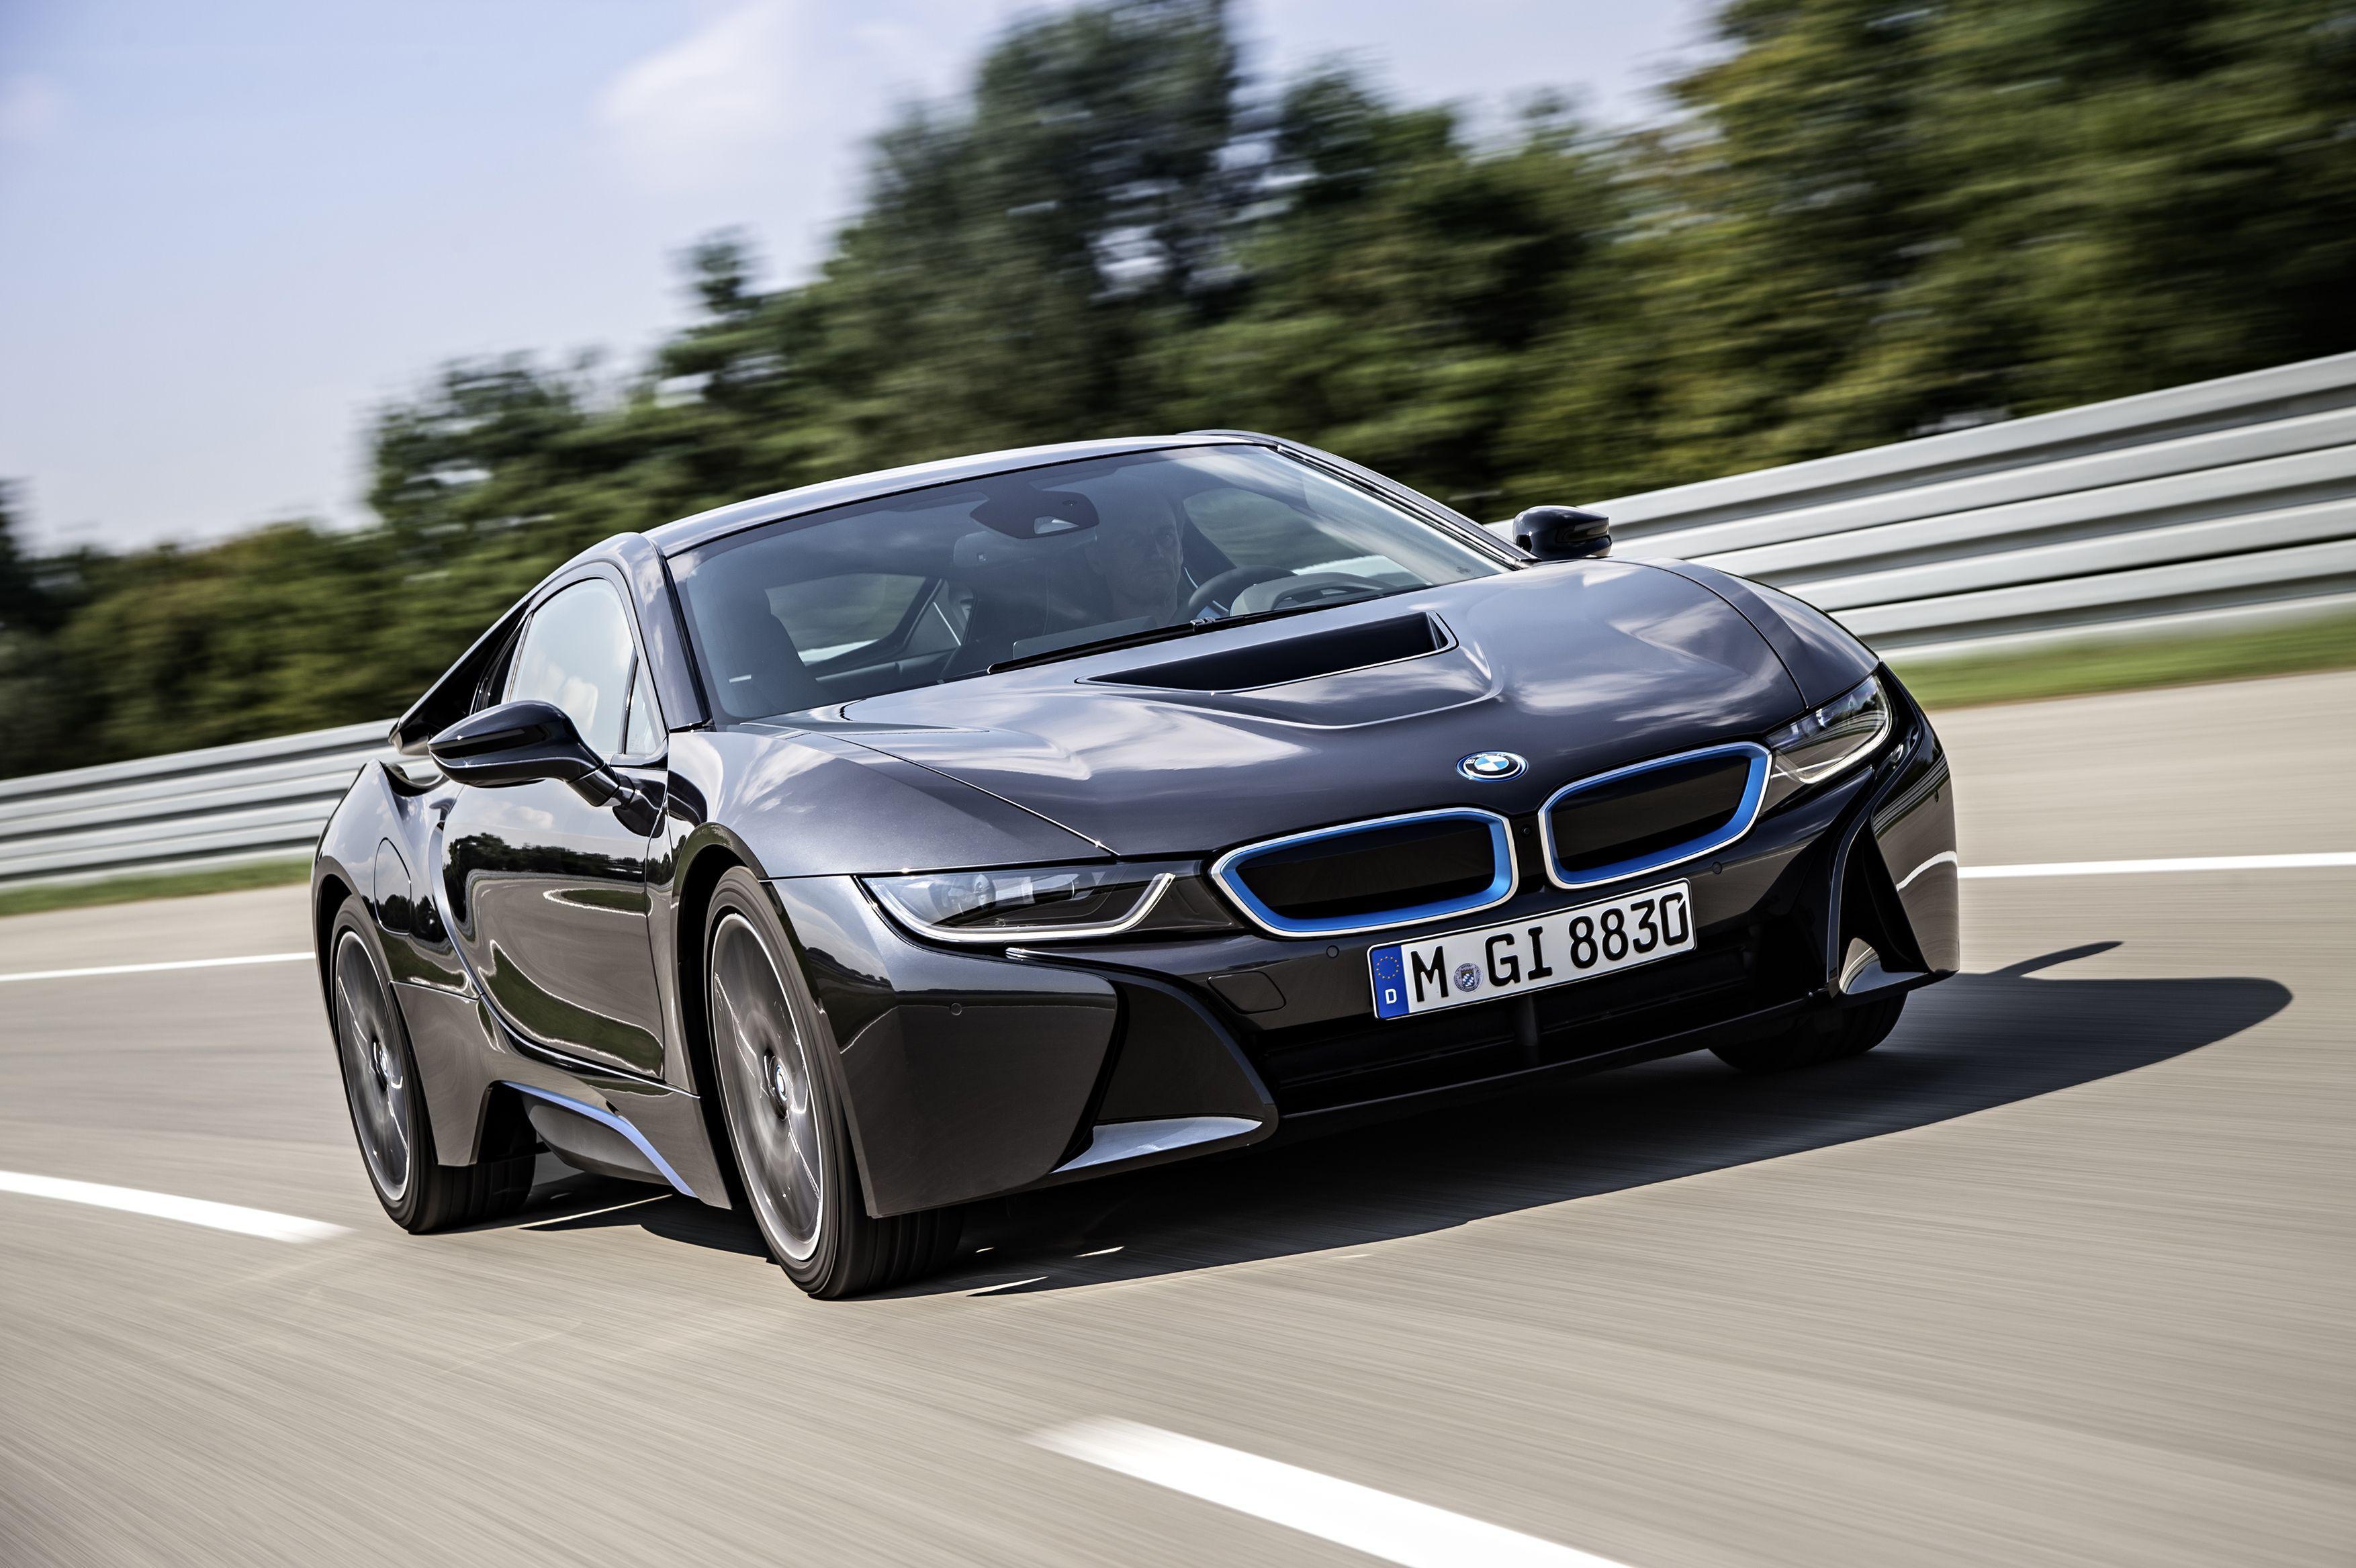 BMW i8 High Resolution Wallpaper / Image Gallery